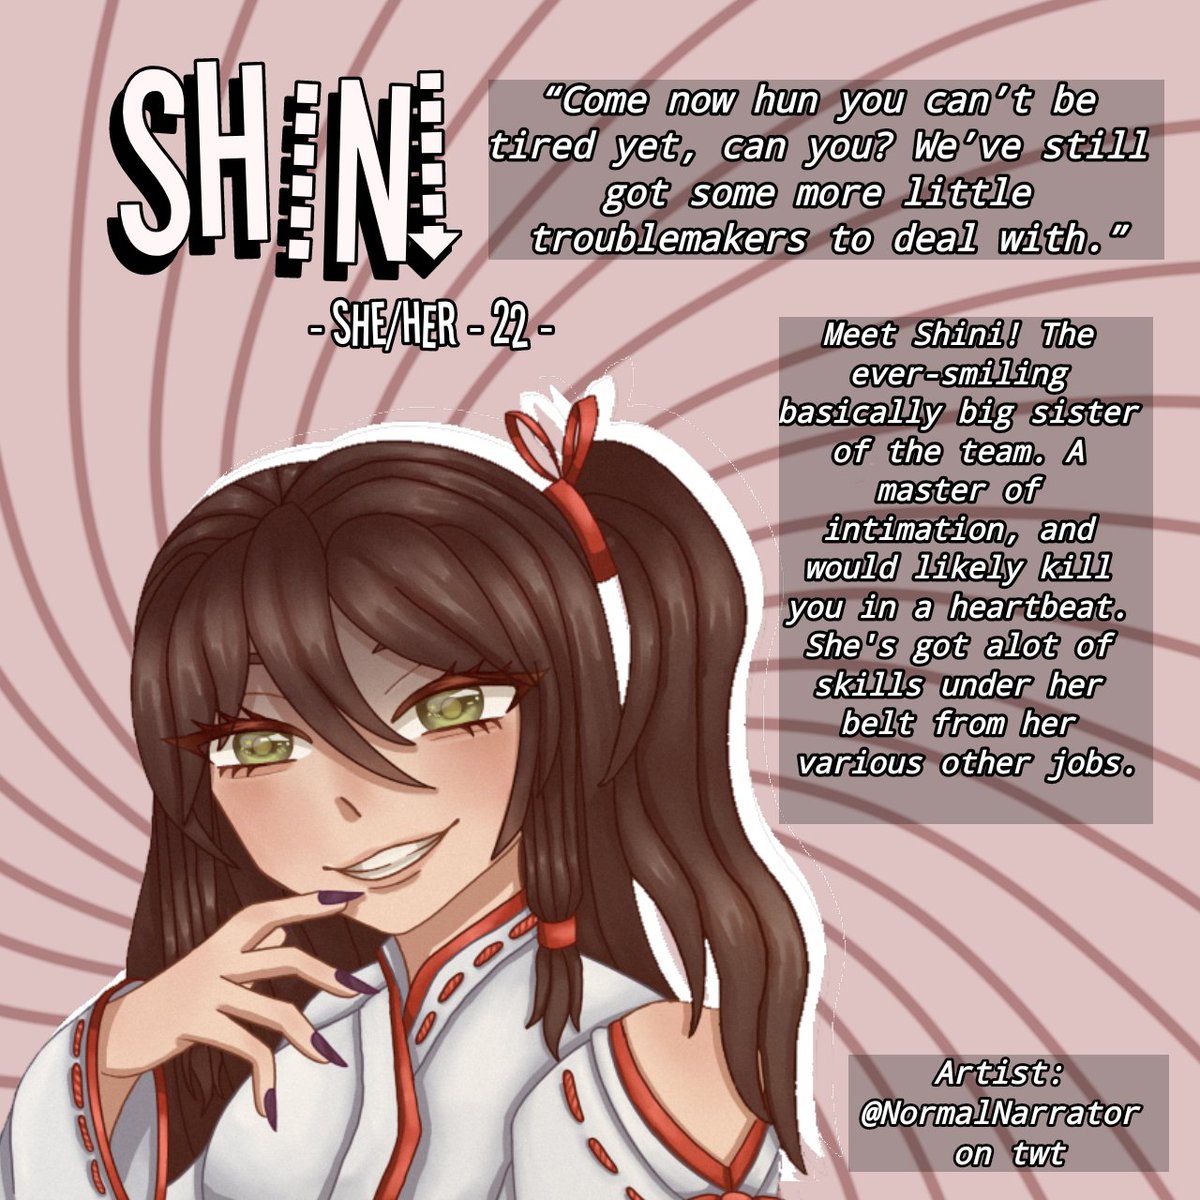 Meet Shini, the mysterious and charming “wine aunt” of VPI. Always smiling even at inappropriate times, you mustn’t forget though that she will quickly take care of those who pose a threat. Get on her bad side and she will make you experience hell with a polite smile on her face.